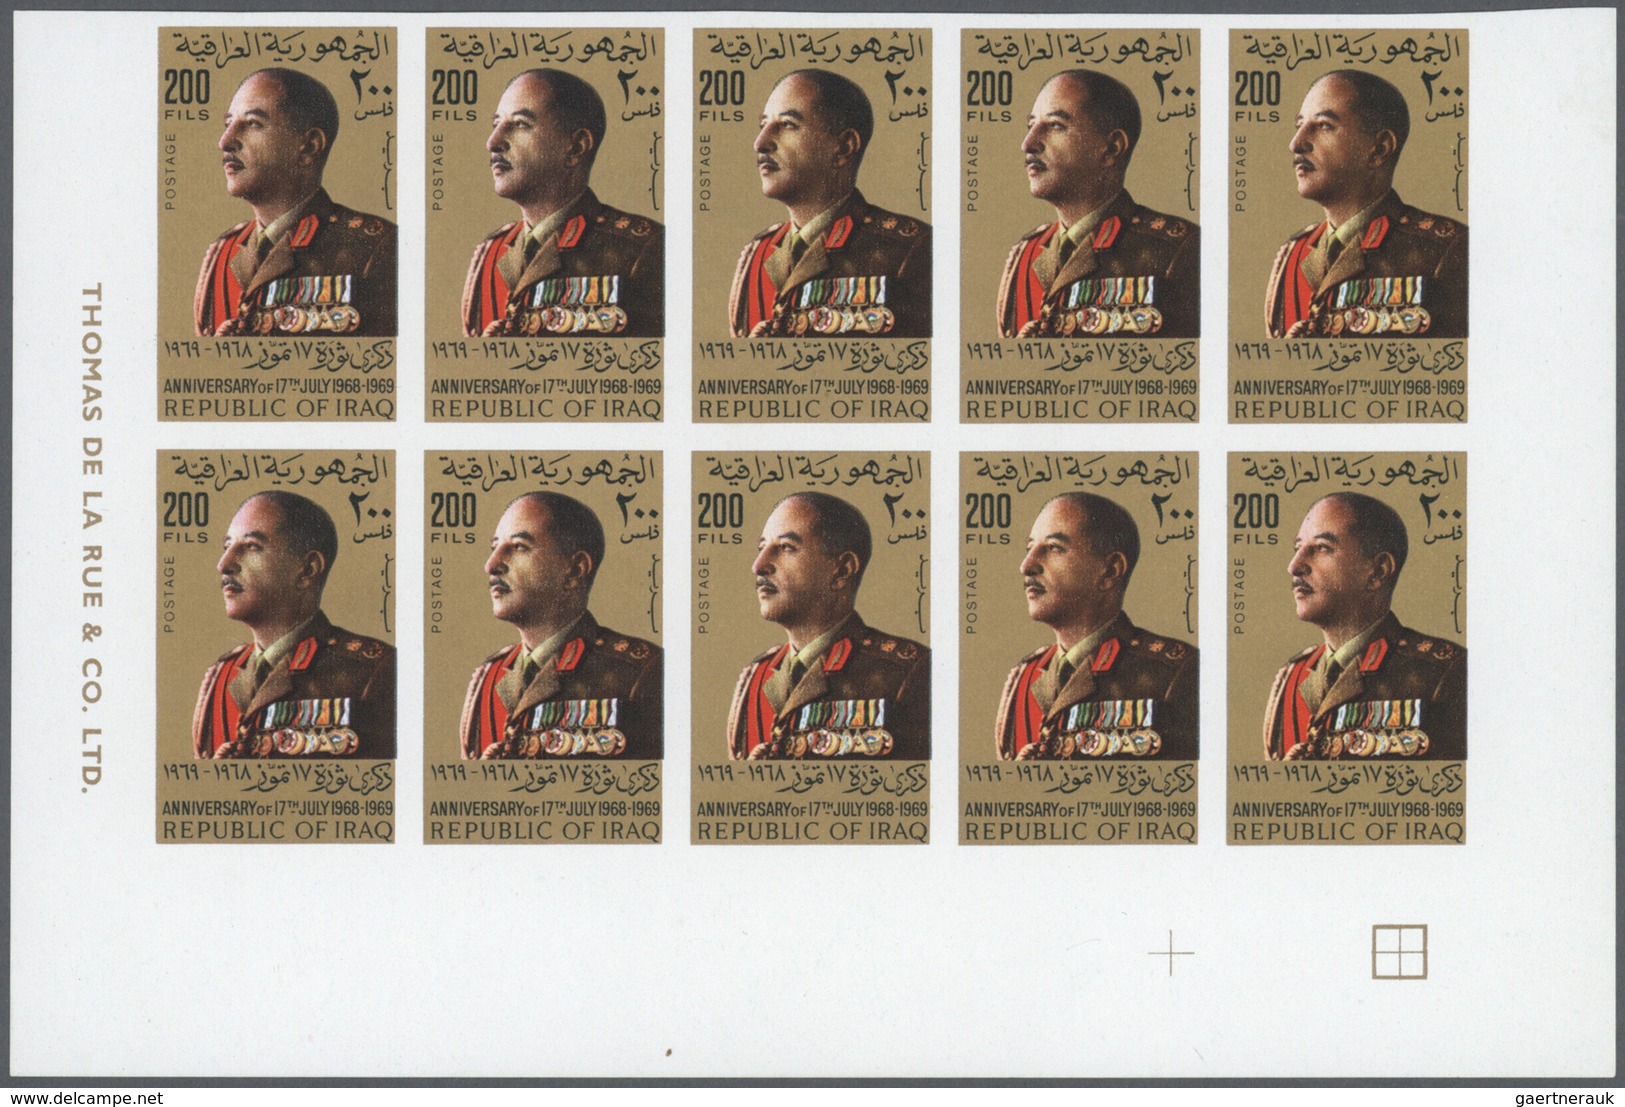 Irak: 1940-2000, Large album containing early complete sheets postage and service stamps, overprinte